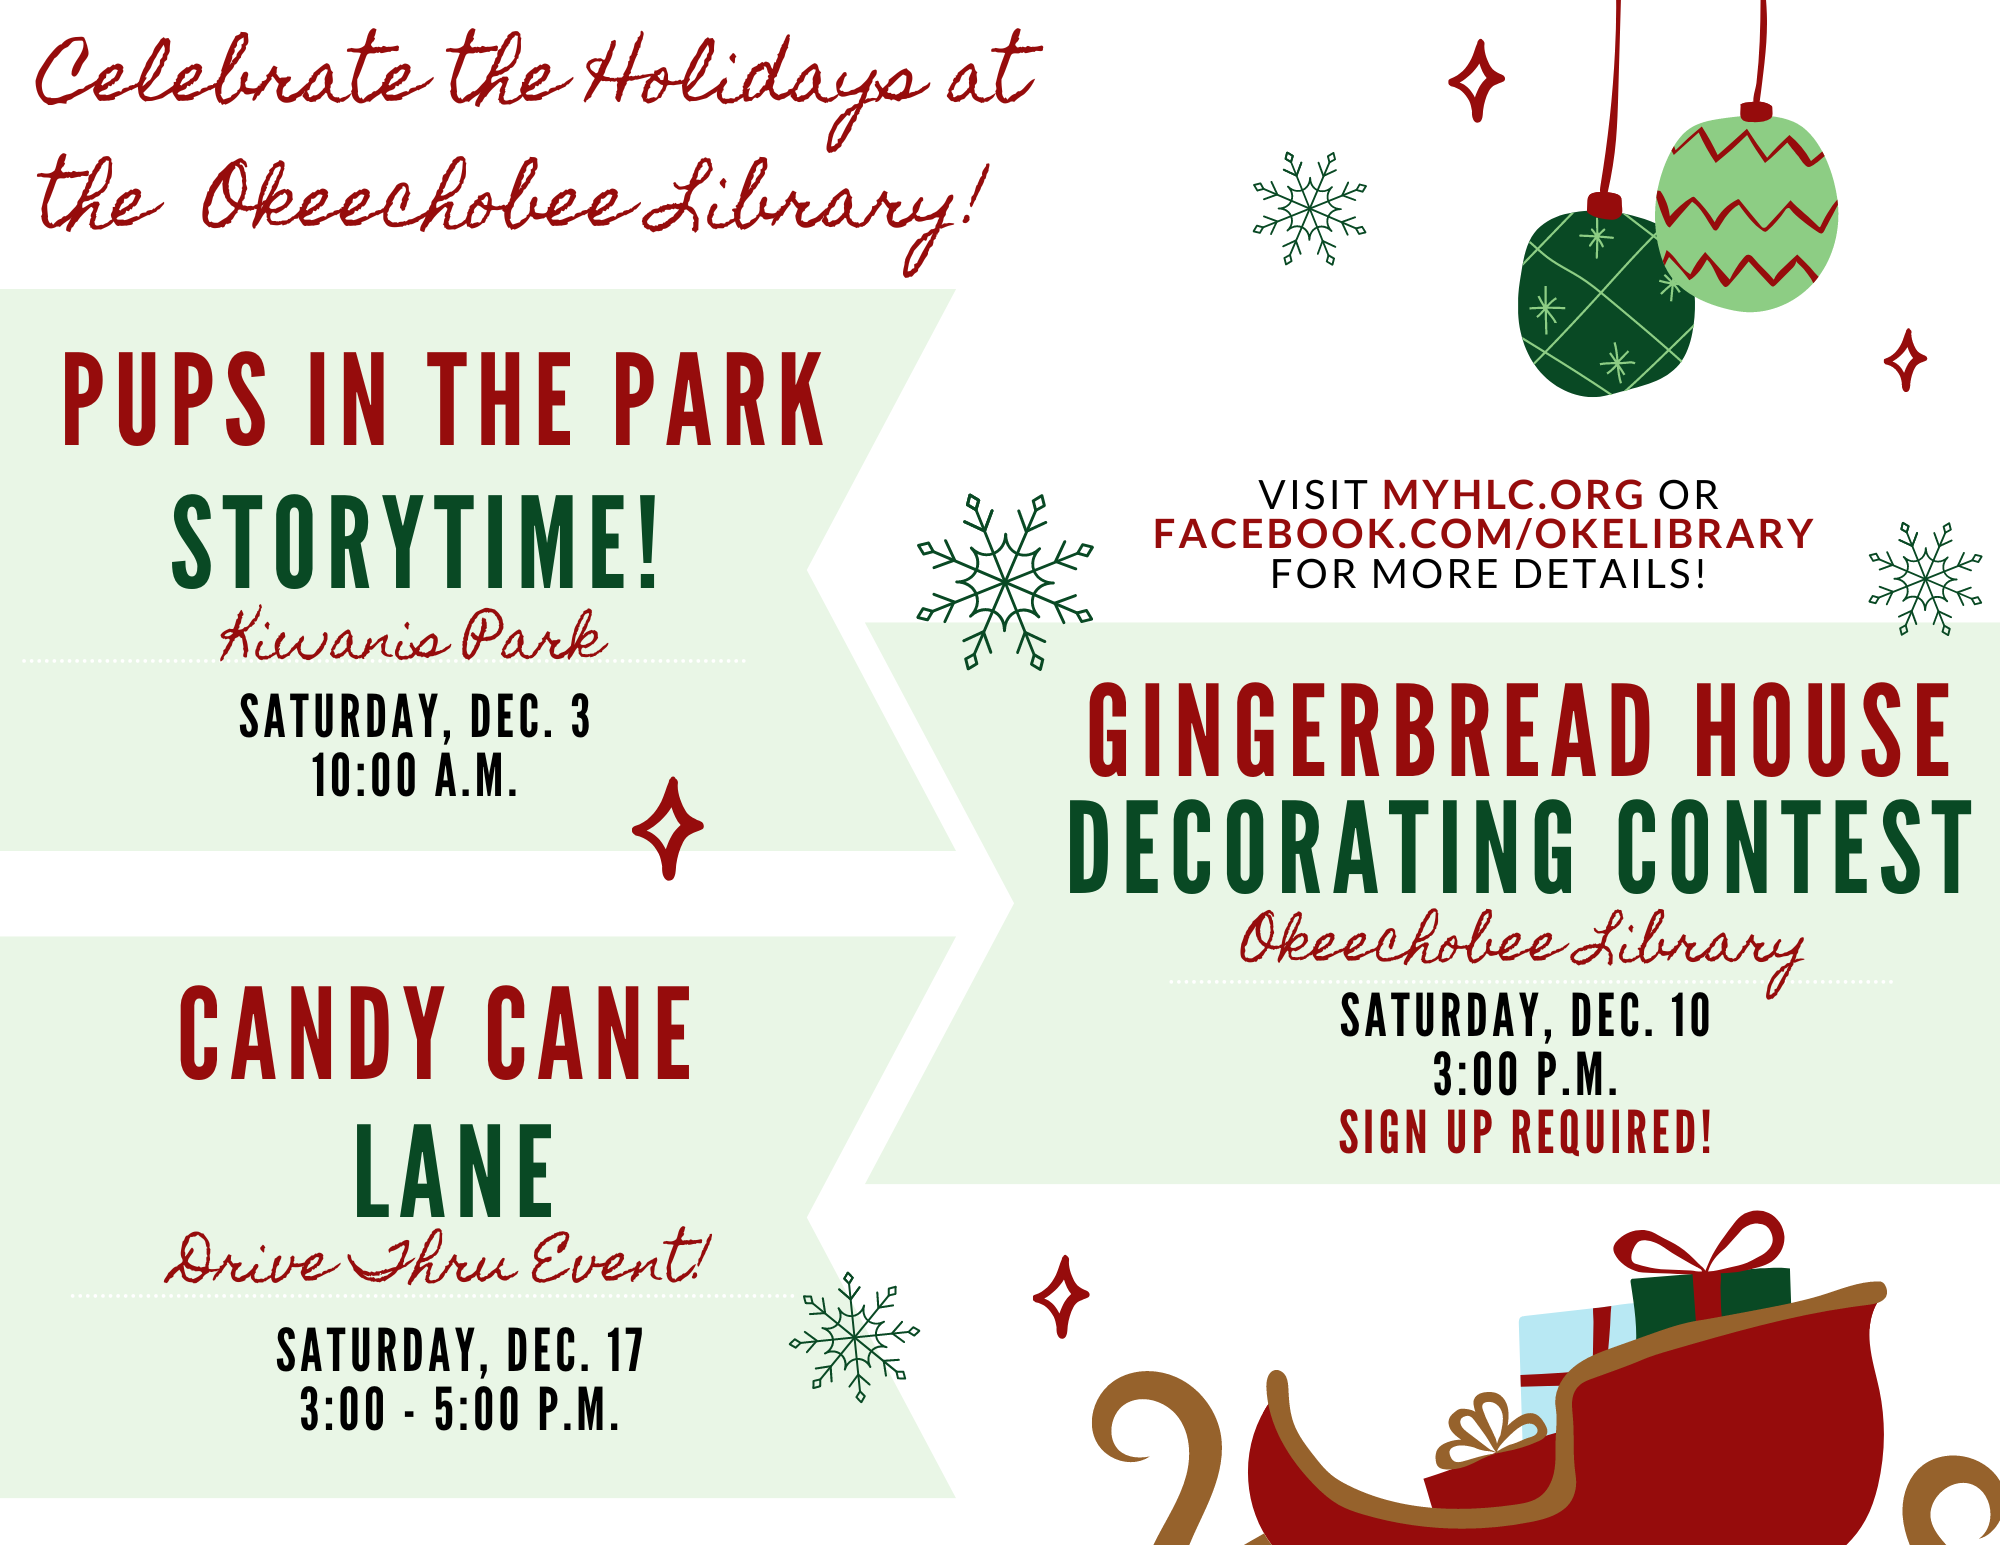 "Don't forget to stop by the Okeechobee Library and check out our programs this Holiday Season! - Pups in the Park Storytime: Saturday, December 3rd at 10:00 a.m. at Kiwanis Park - Gingerbread House Contest:  Saturday, December 10th at 3:00 p.m. - Candy Cane Lane Drive Thru: Saturday, December 17th from 3:00 p.m. - 5:00 p.m. *WHILE SUPPLIES LAST* We can't wait to see you!"